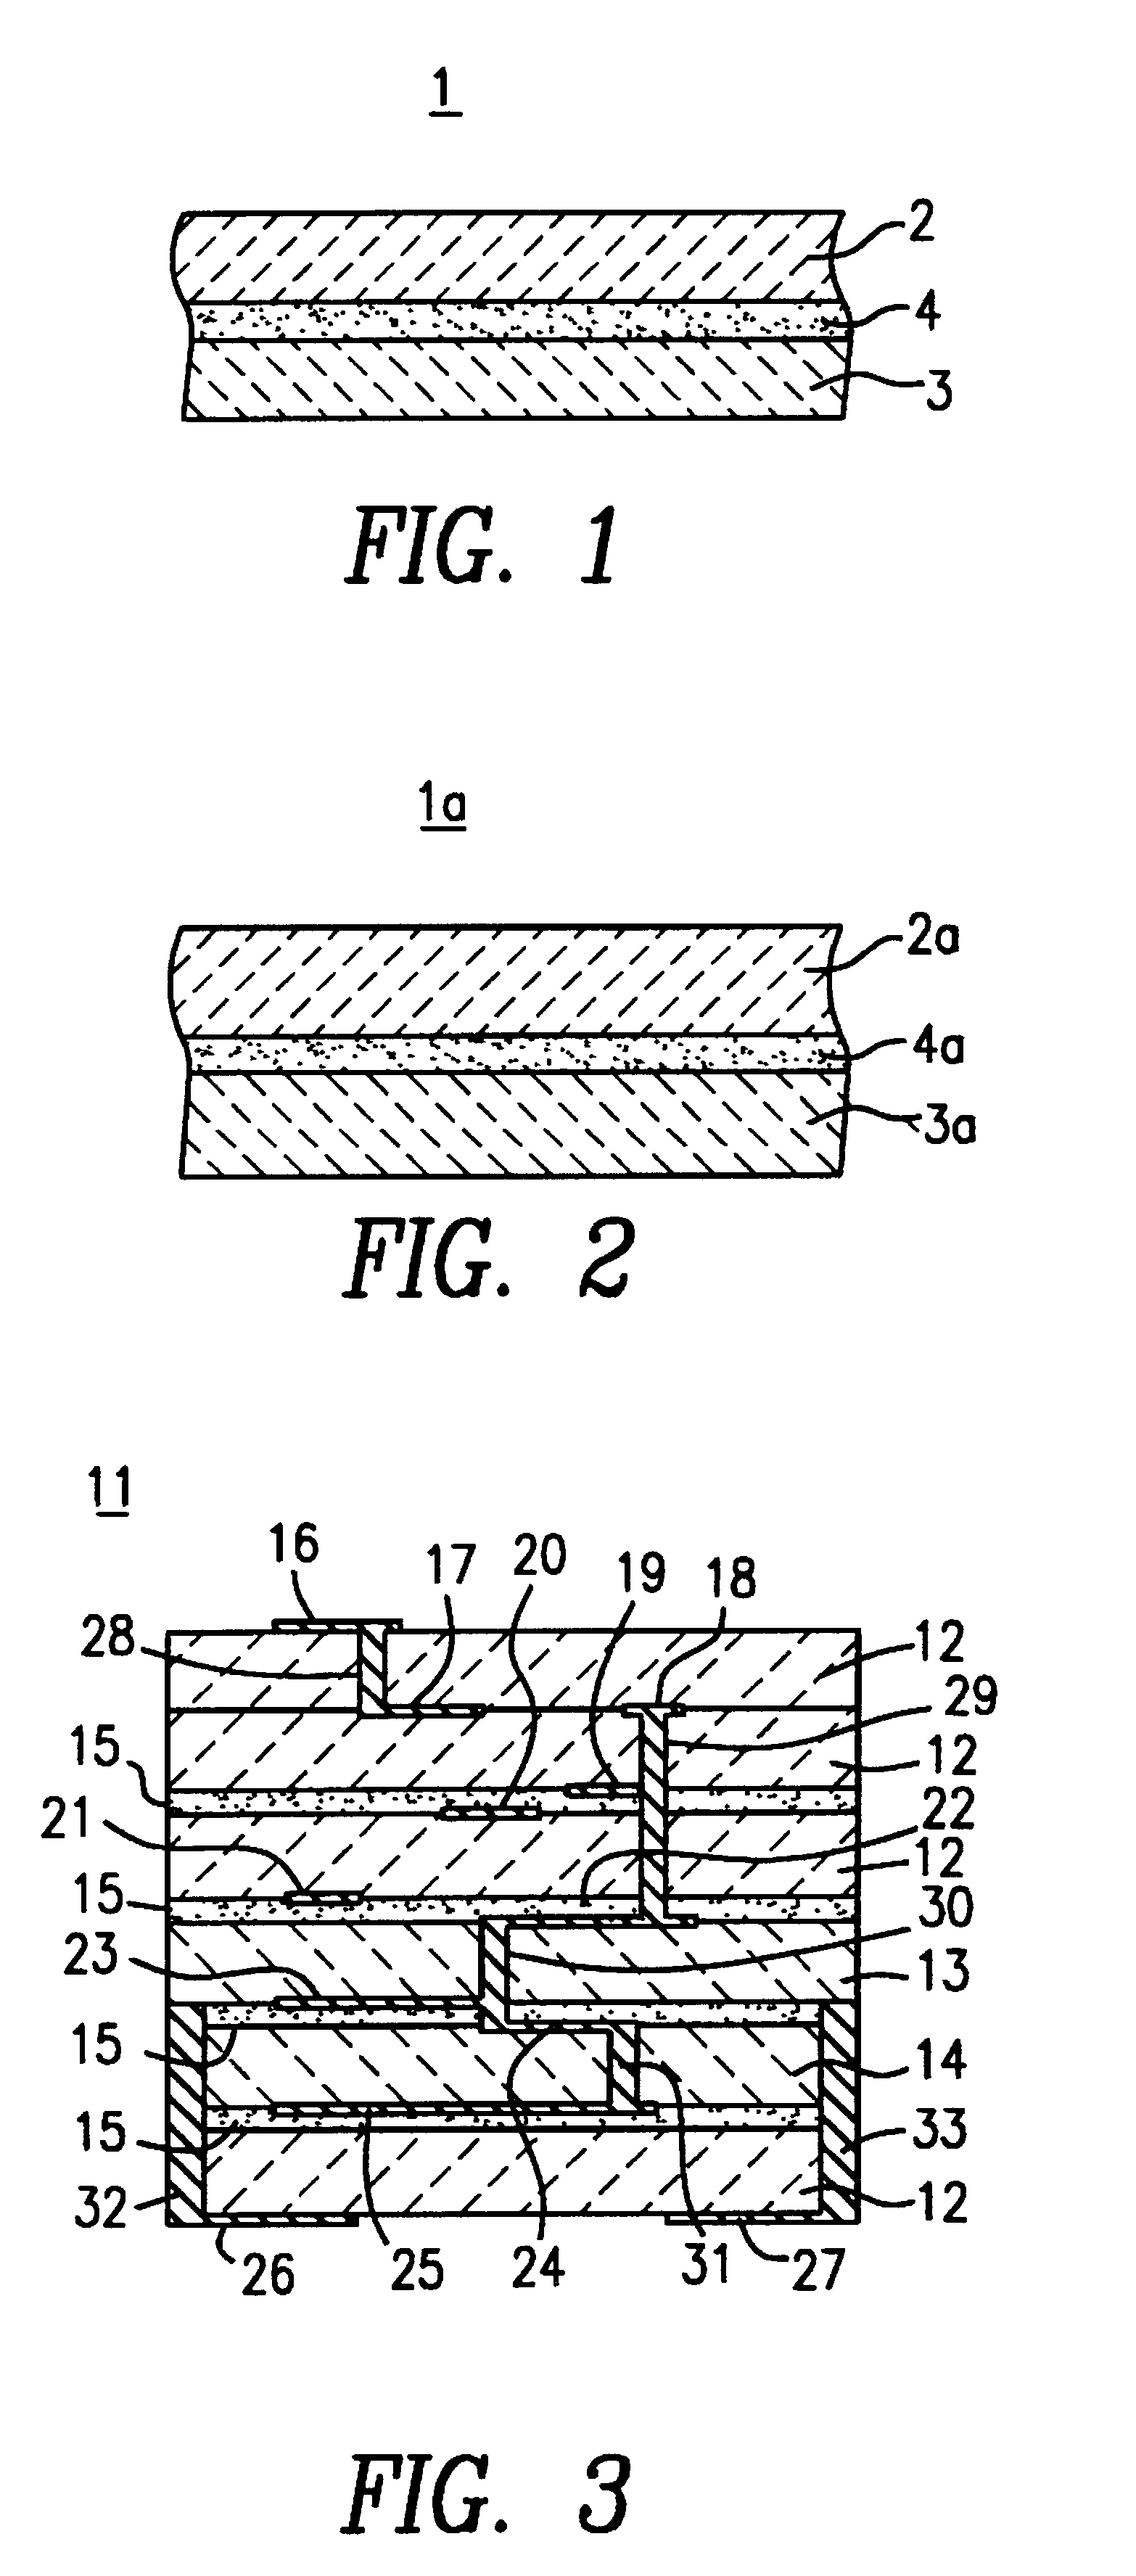 Multilayered ceramic substrate and method of producing the same